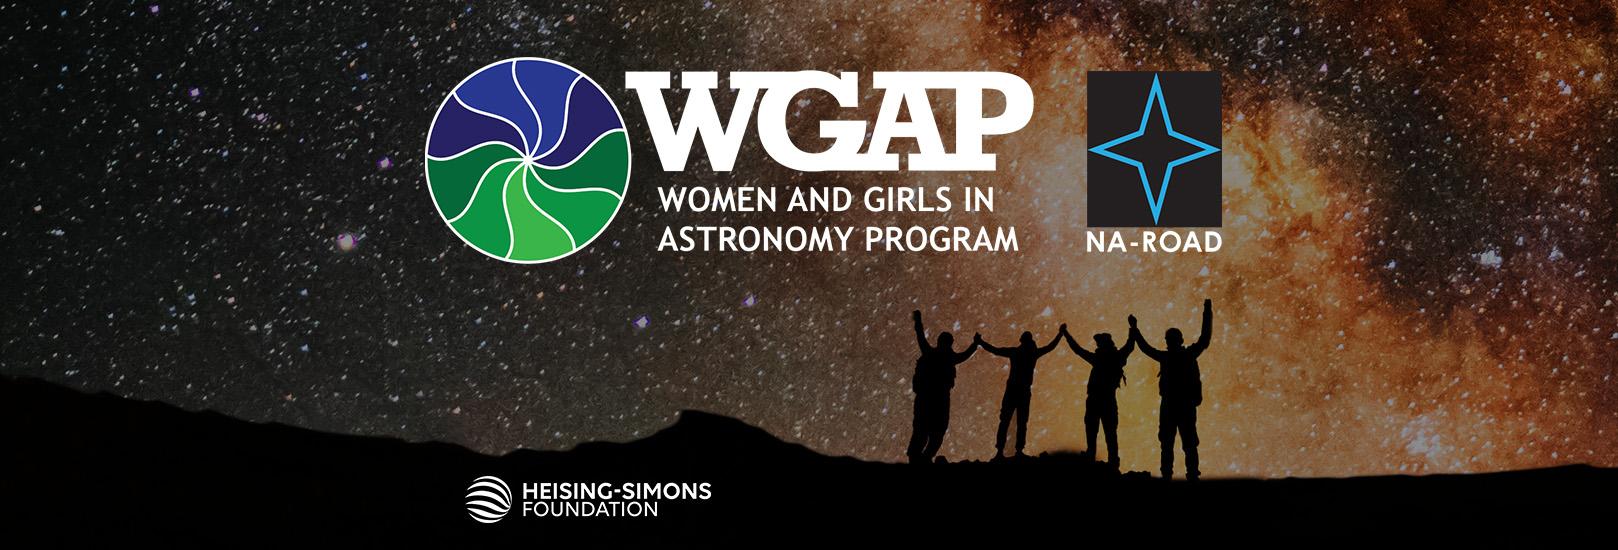 Logos of WGAP, NA-ROAD, and HS over a starry background with 4 people with raised and joined hands